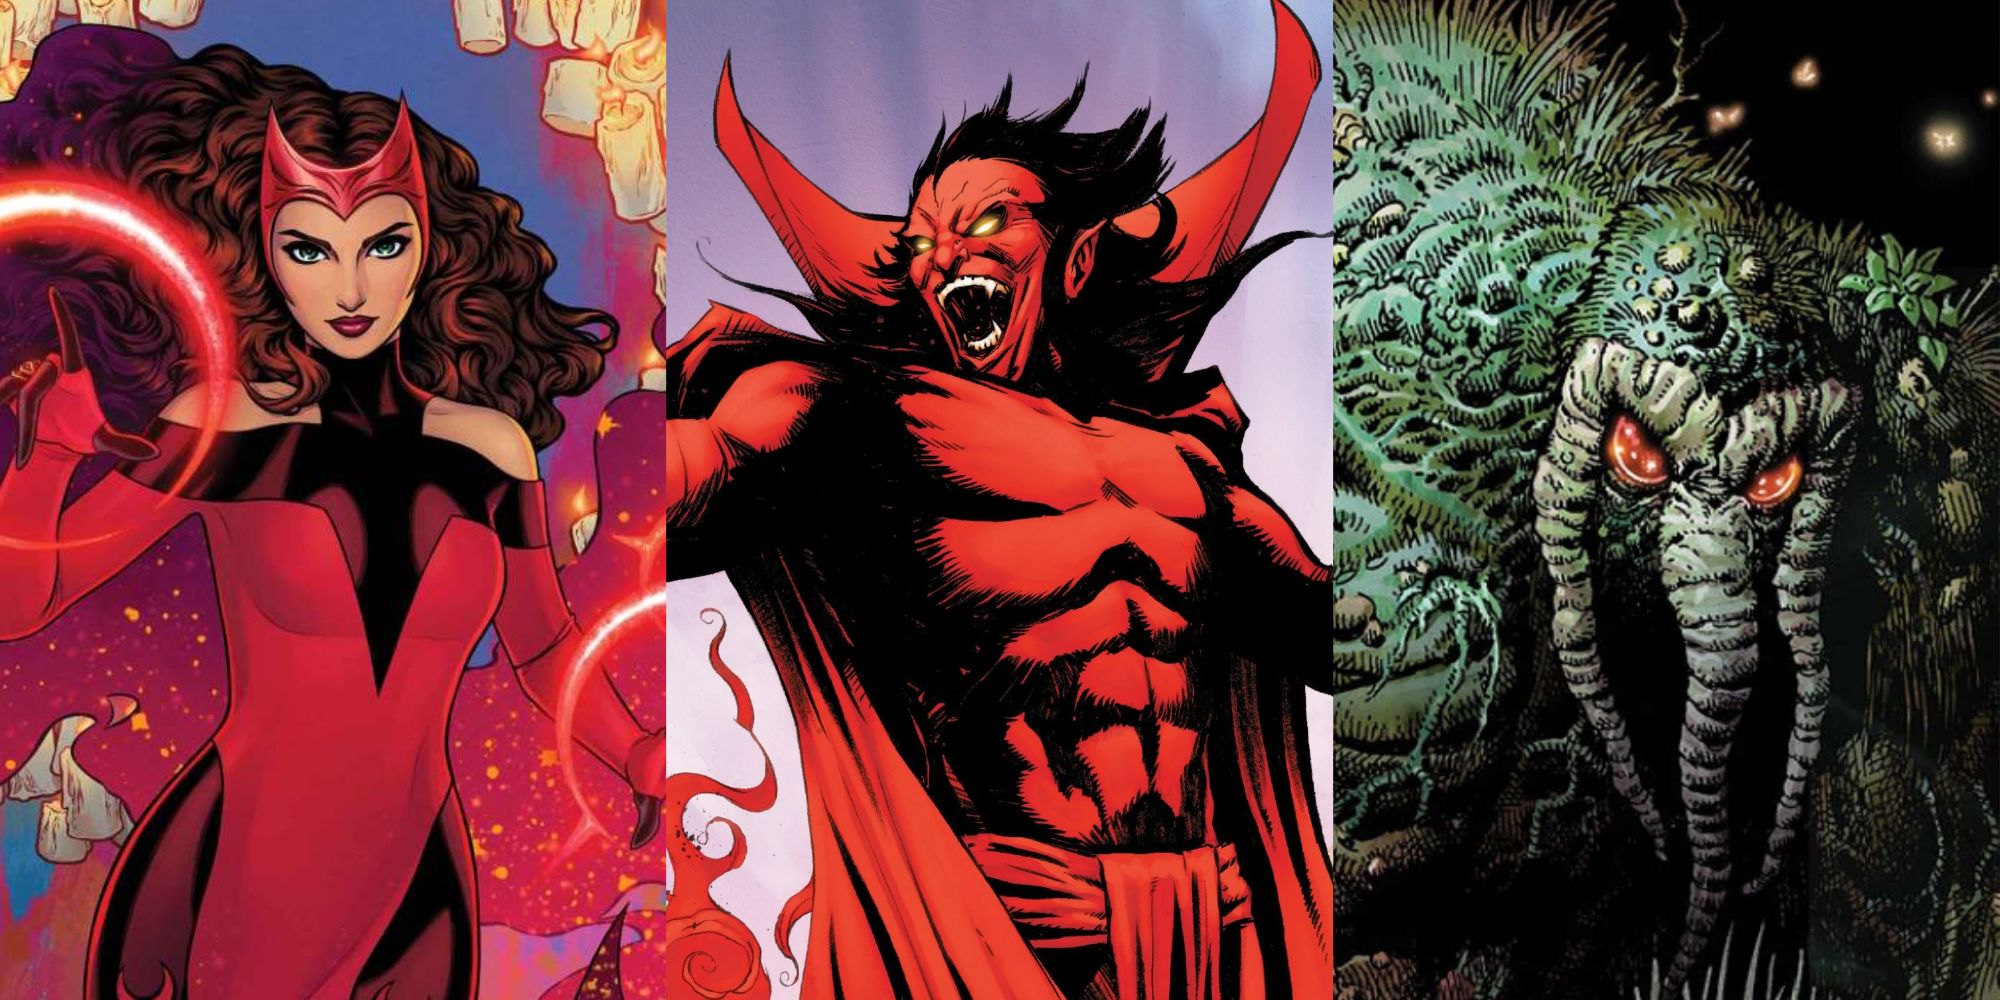 Split image of Scarlet Witch, Mephisto, and Man-Thing from Marvel Comics.